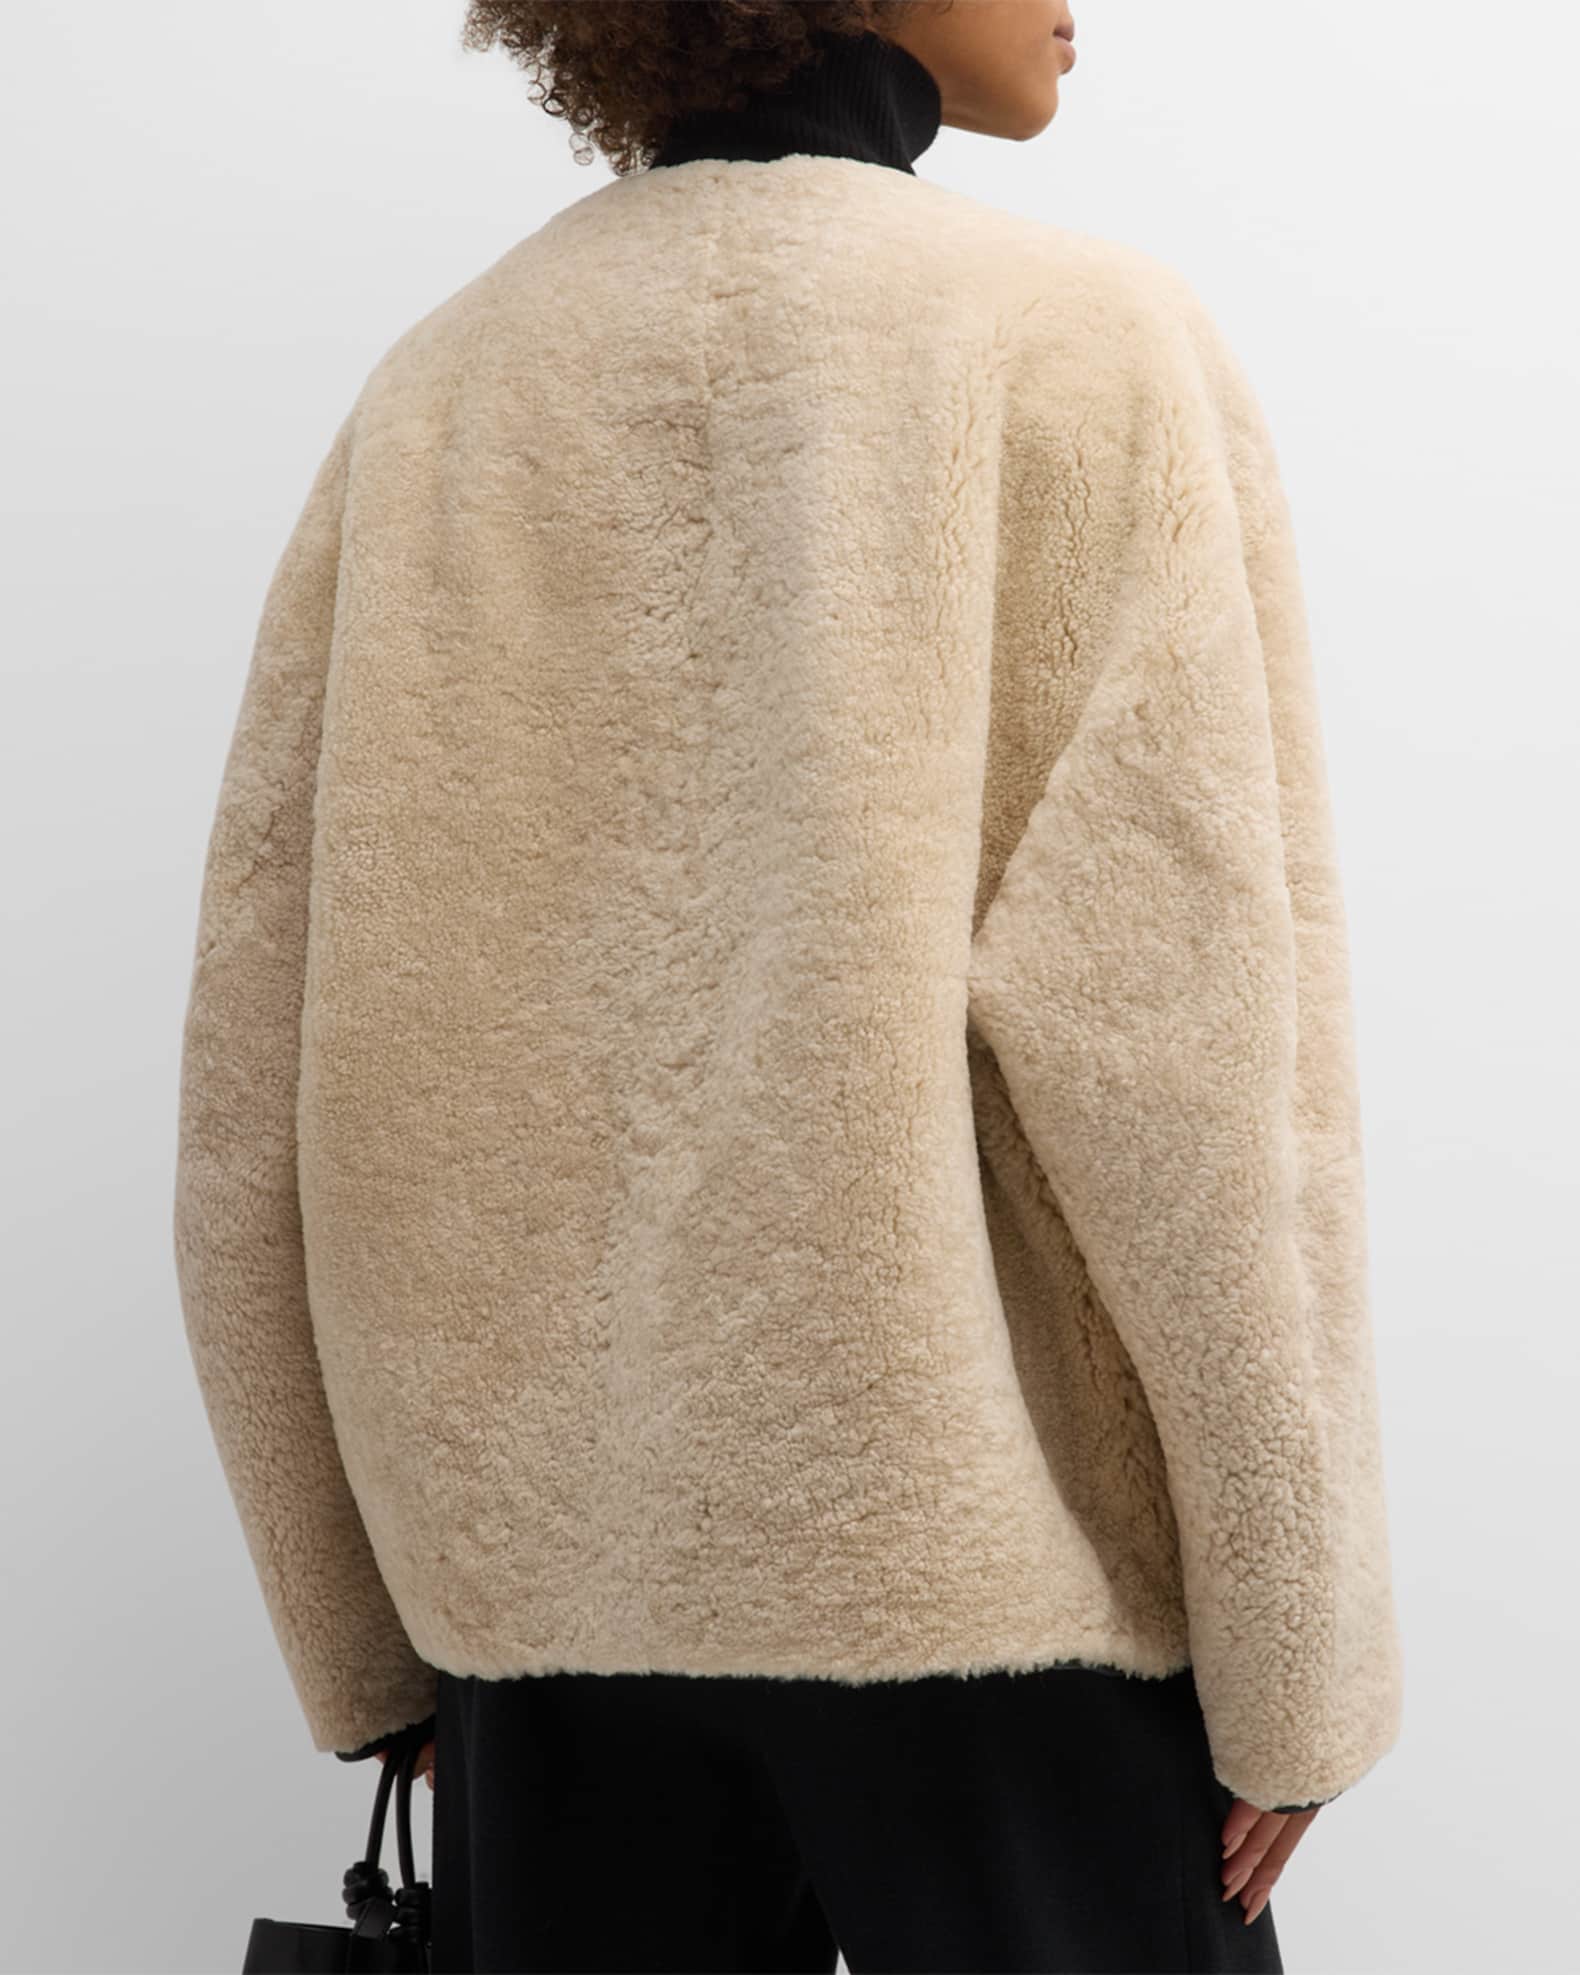 Toteme Sheep Shearling Clasp Single-Breasted Teddy Jacket | Neiman Marcus